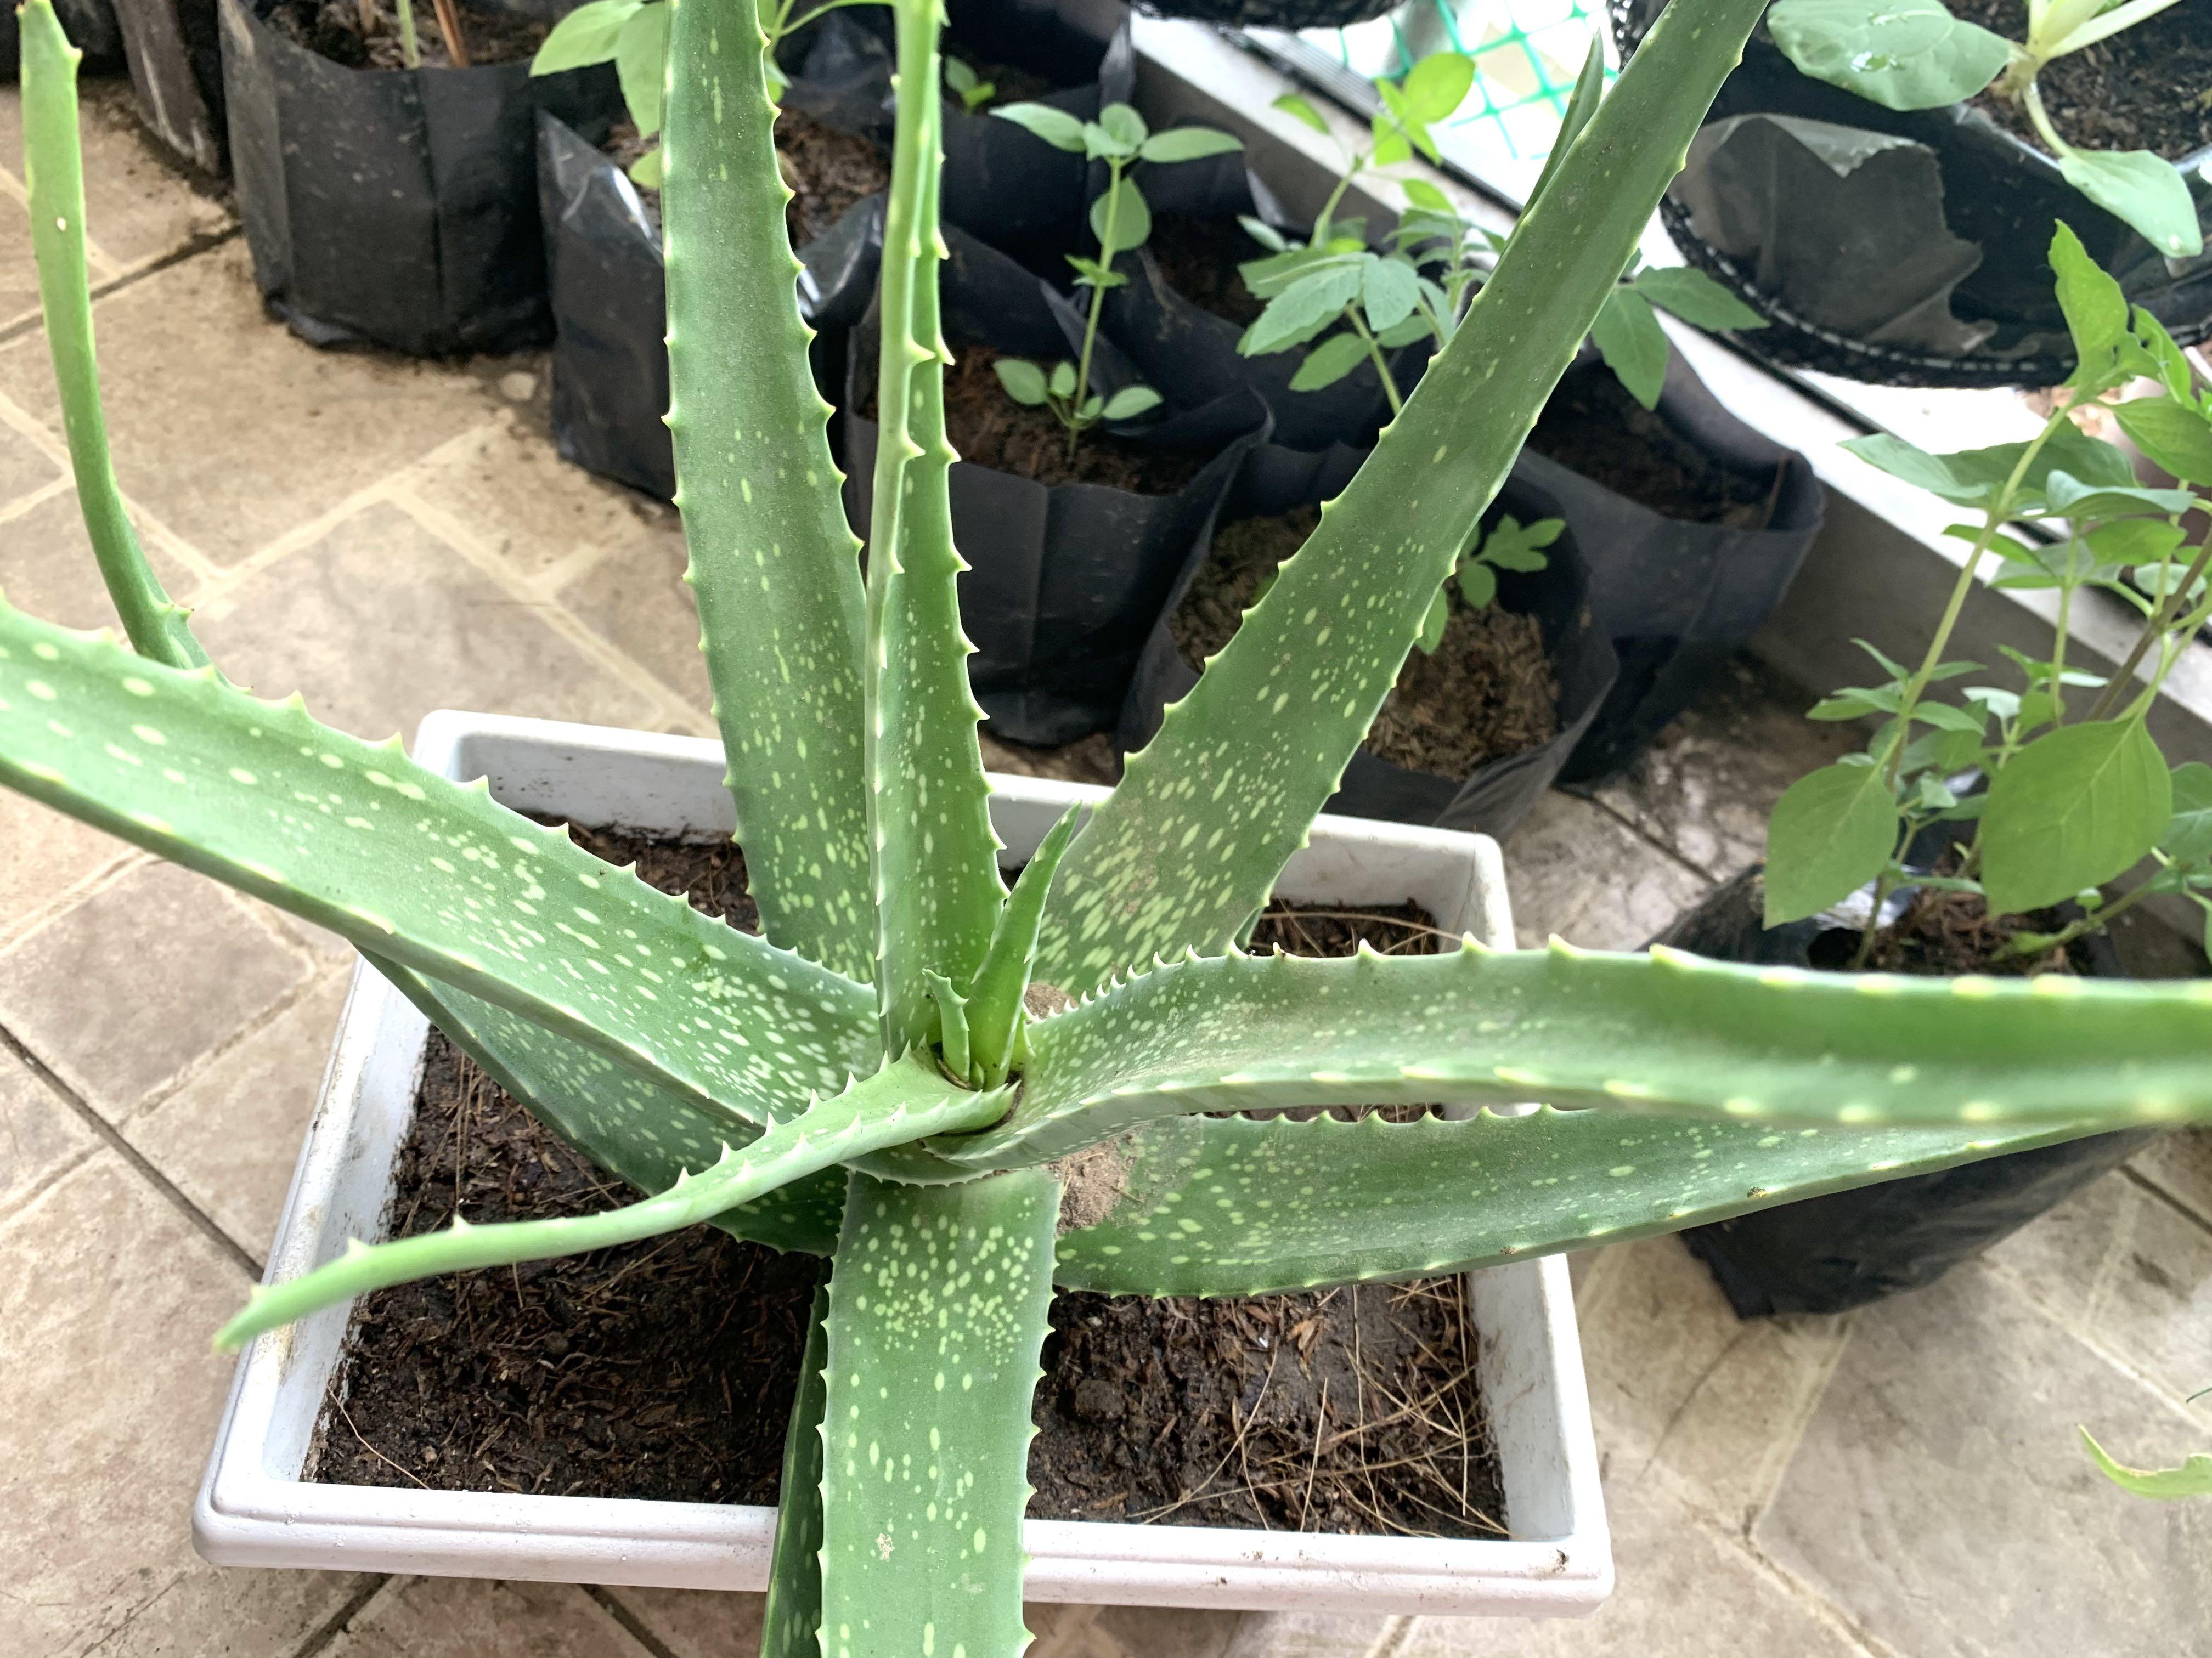 Aloe Vera Live Plantmother Plantnon Edible Furniture And Home Living Gardening Plants And Seeds 0477